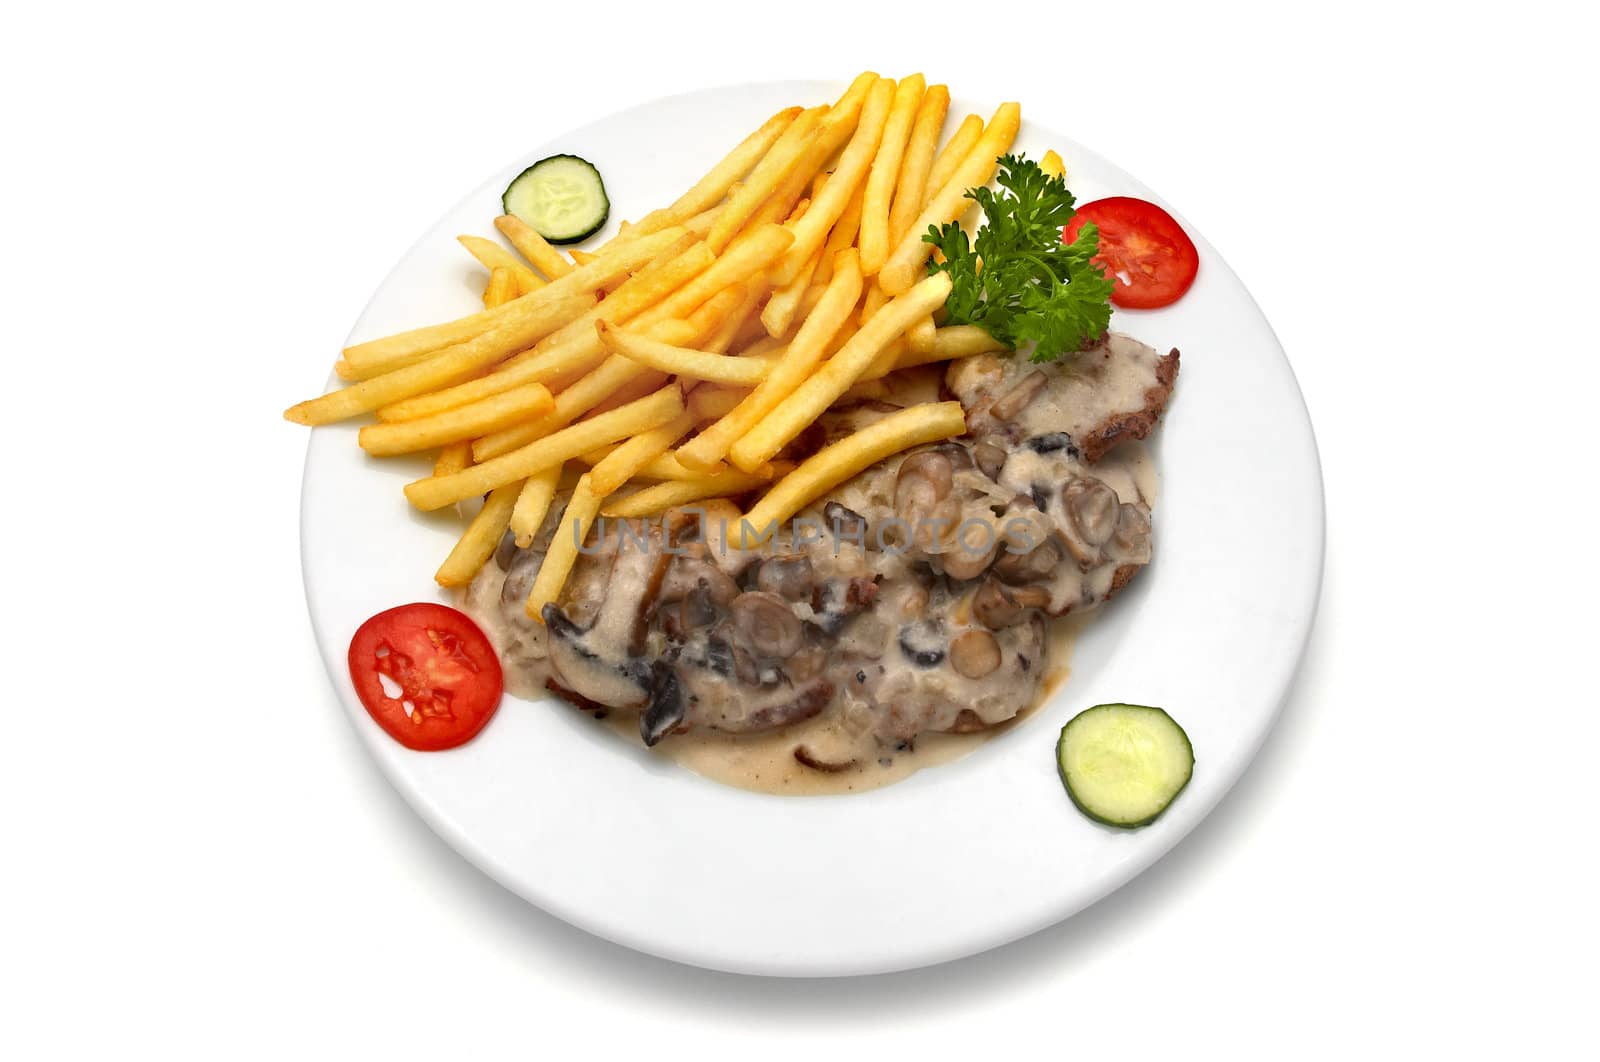 veal medallion with mushroom white sauce and french fries by starush